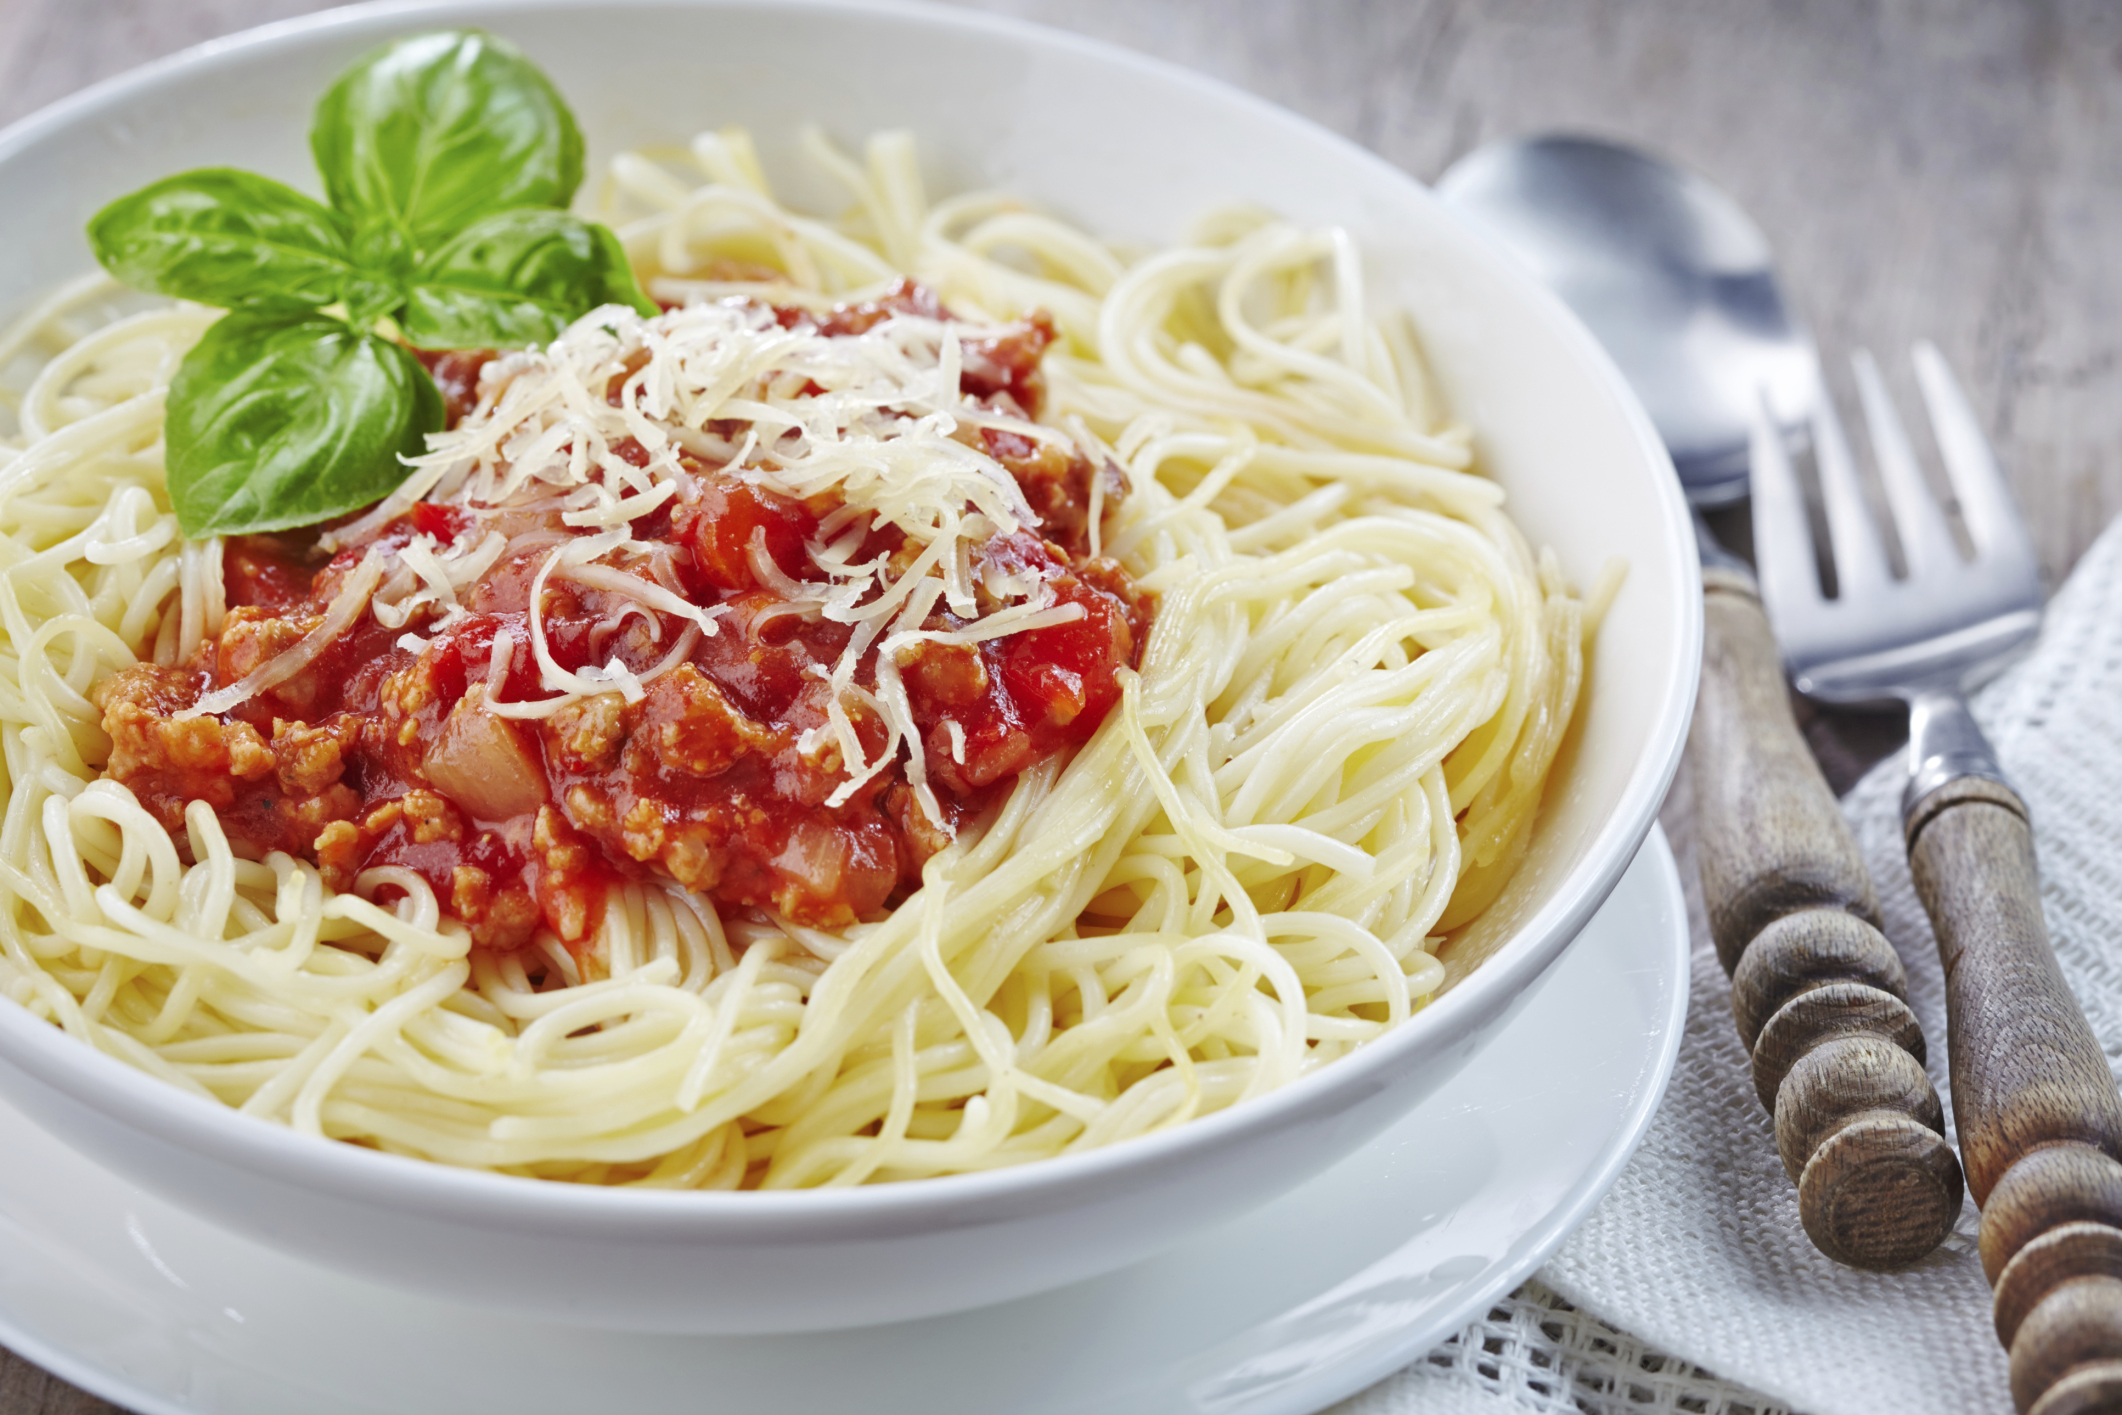 Does Pasta Give You Energy? | livestrong